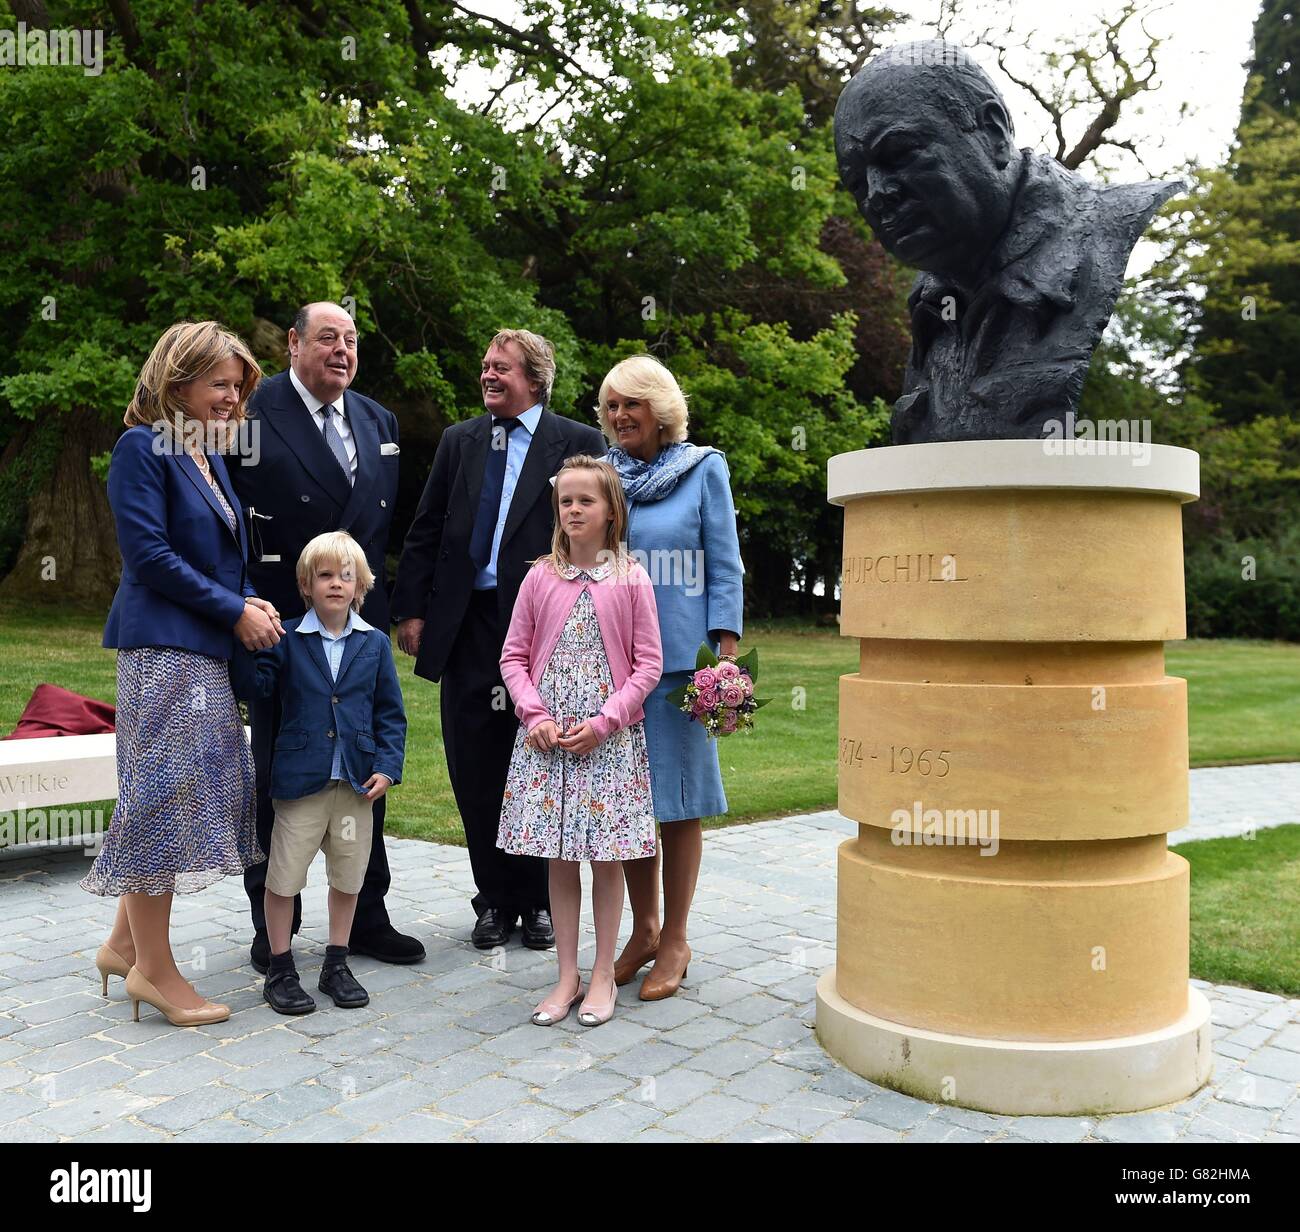 The Duchess of Cornwall (right) with Sir Nicholas Soames MP (second left) along with The Duke of Marlborough, Jamie Spencer-Churchill (third right) his wife Edla Griffiths (left), his son Lord Caspar Spencer-Churchill (third left) and daughter Lady Araminta Spencer-Churchill stand next to a newly unveiled bust of Sir Winston Churchill in the grounds of Blenheim Palace, Oxfordshire. Stock Photo